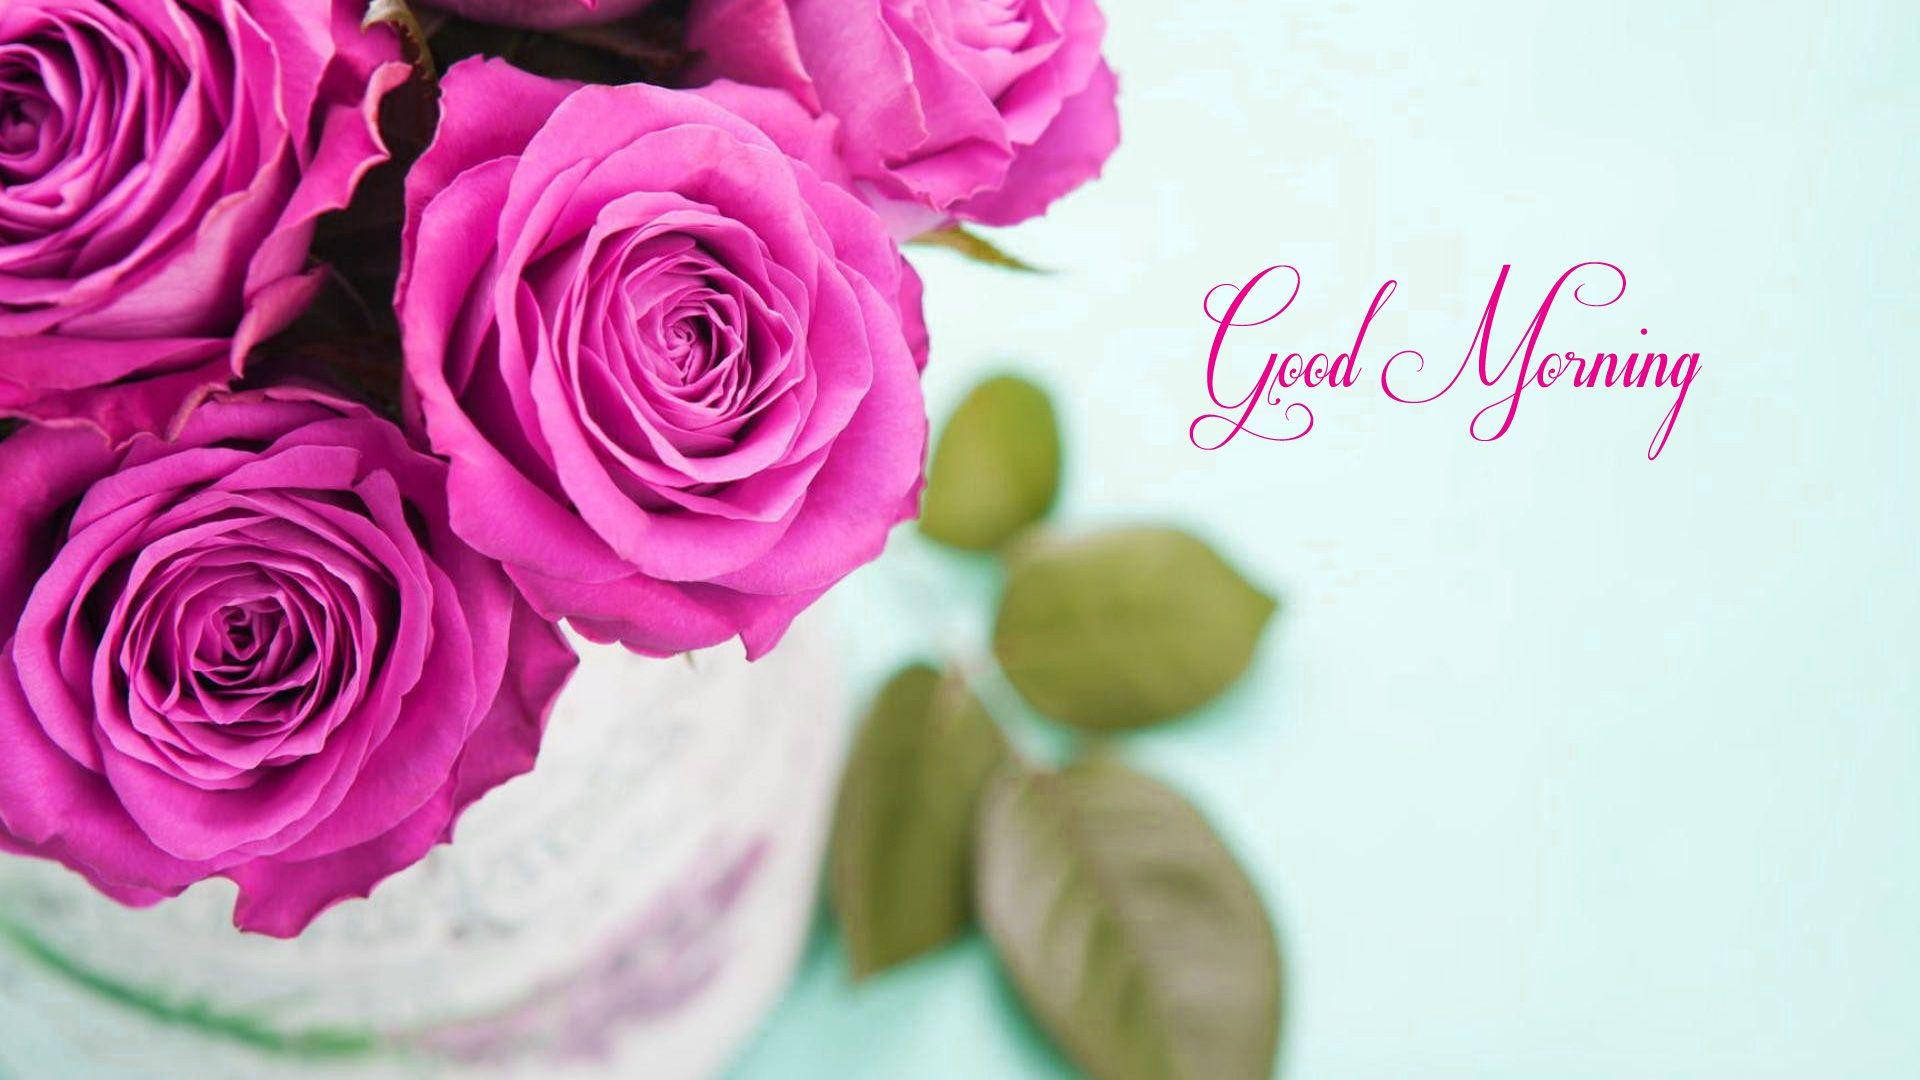 Good Morning Hd With Pink Roses Background